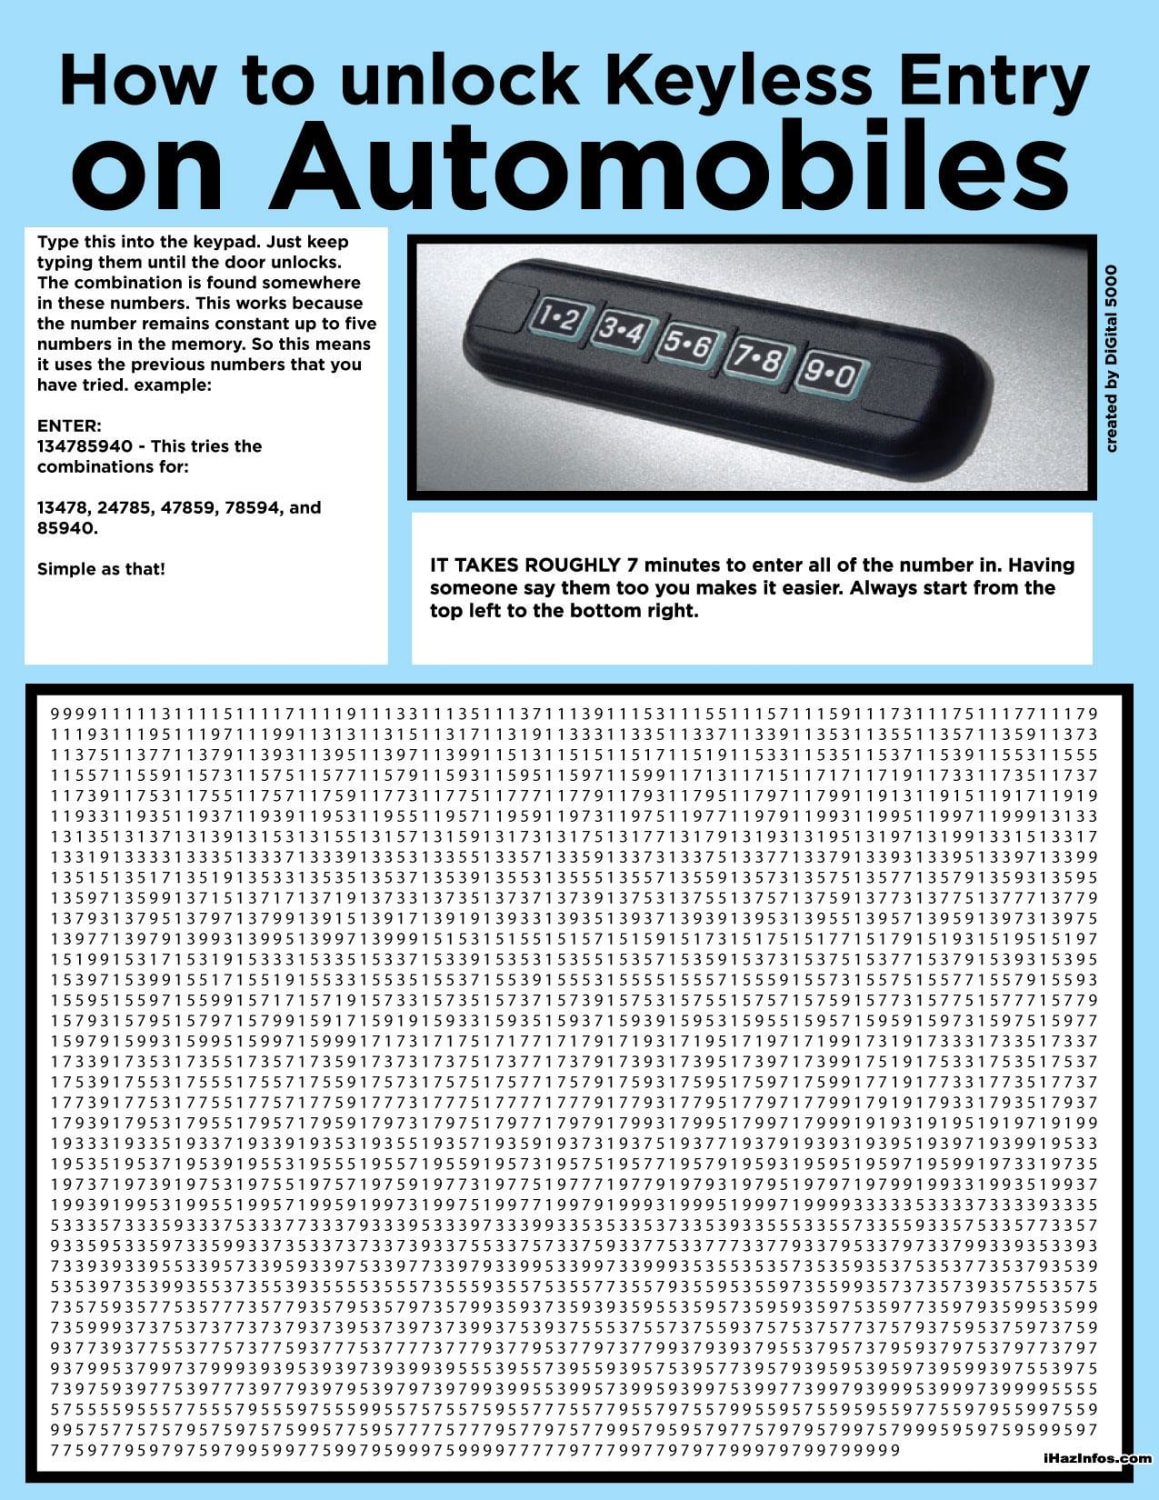 How to unlock automobile keyless entries in about 7 minutes